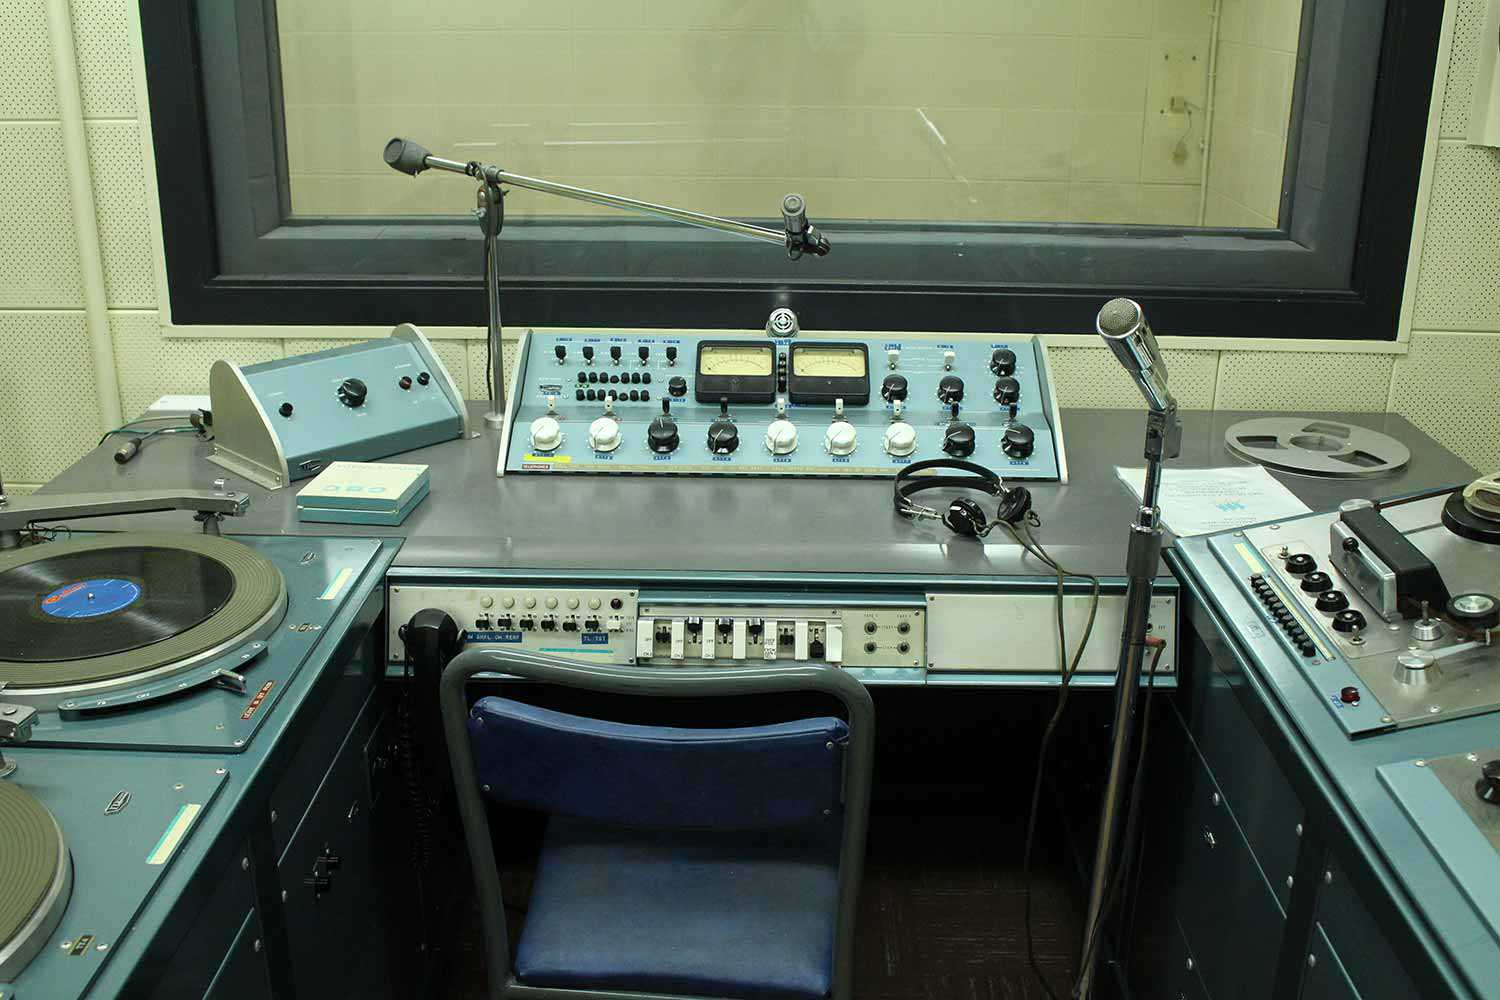 These are the original radio controls for the CBC Studios that would have broadcast to civilians in case of a nuclear disaster. (Photo: Diefenbunker)